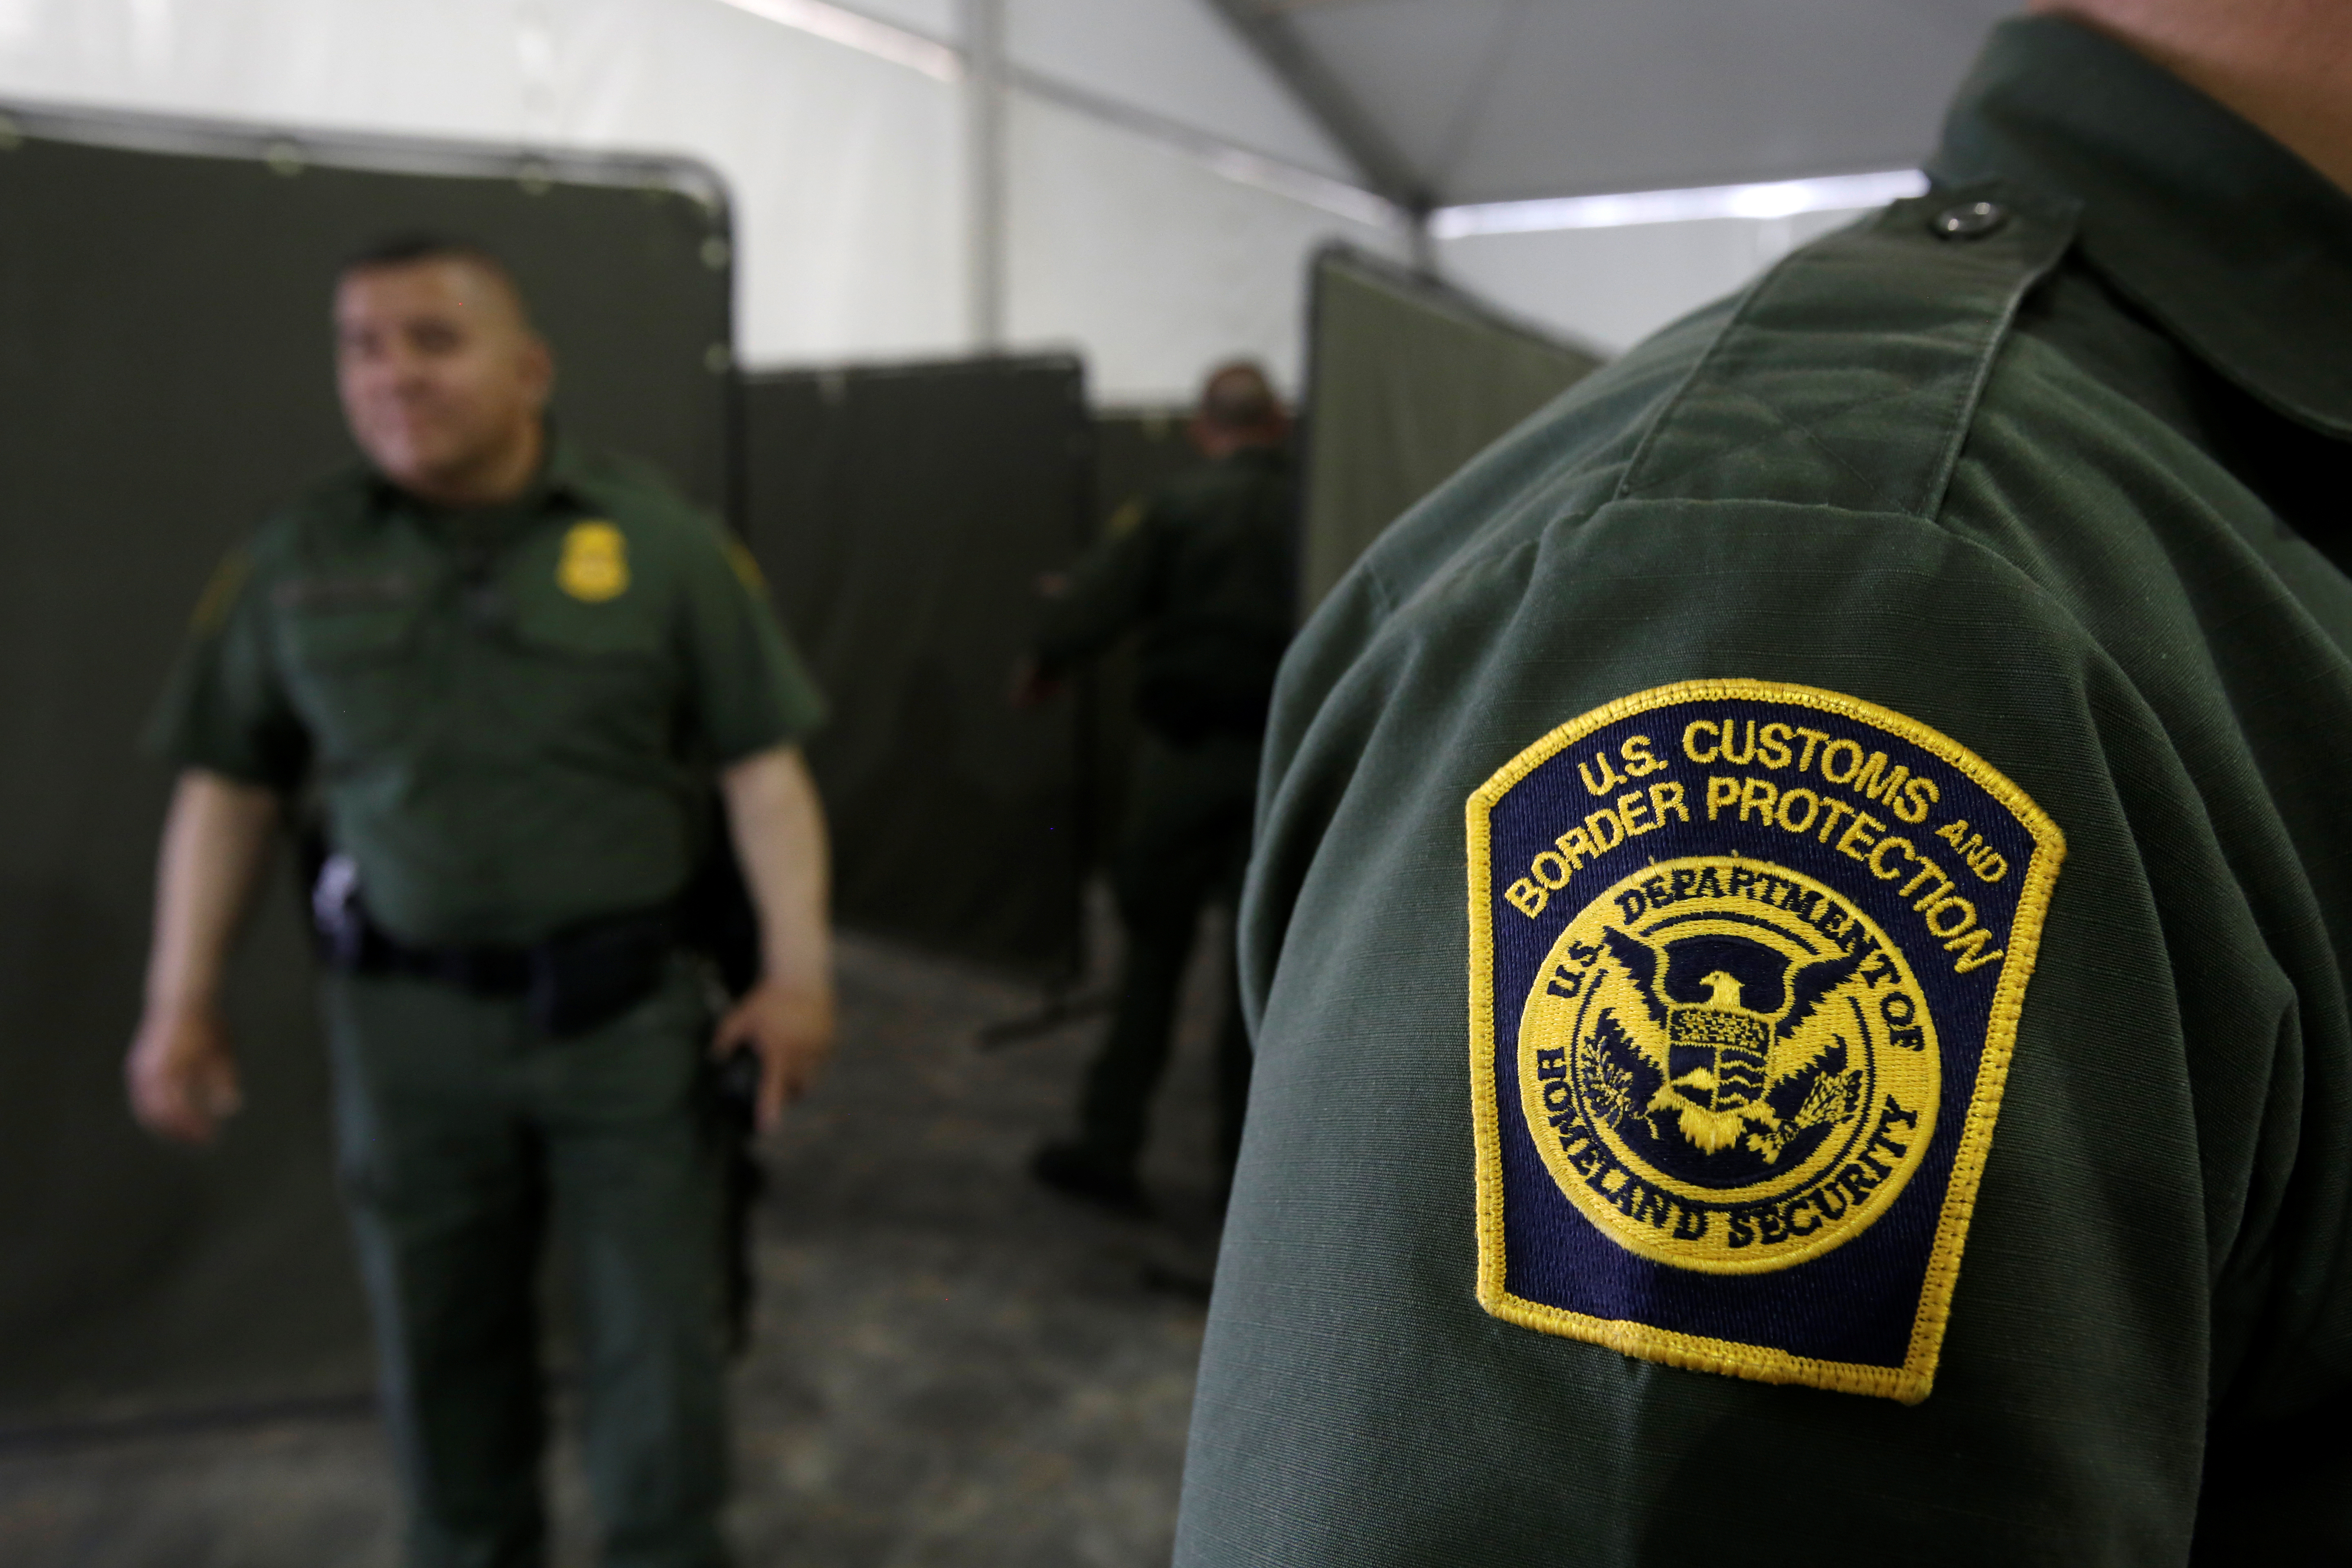 U.S. Border Patrol agents are seen during a tour of U.S. Customs and Border Protection (CBP) temporary holding facilities in El Paso